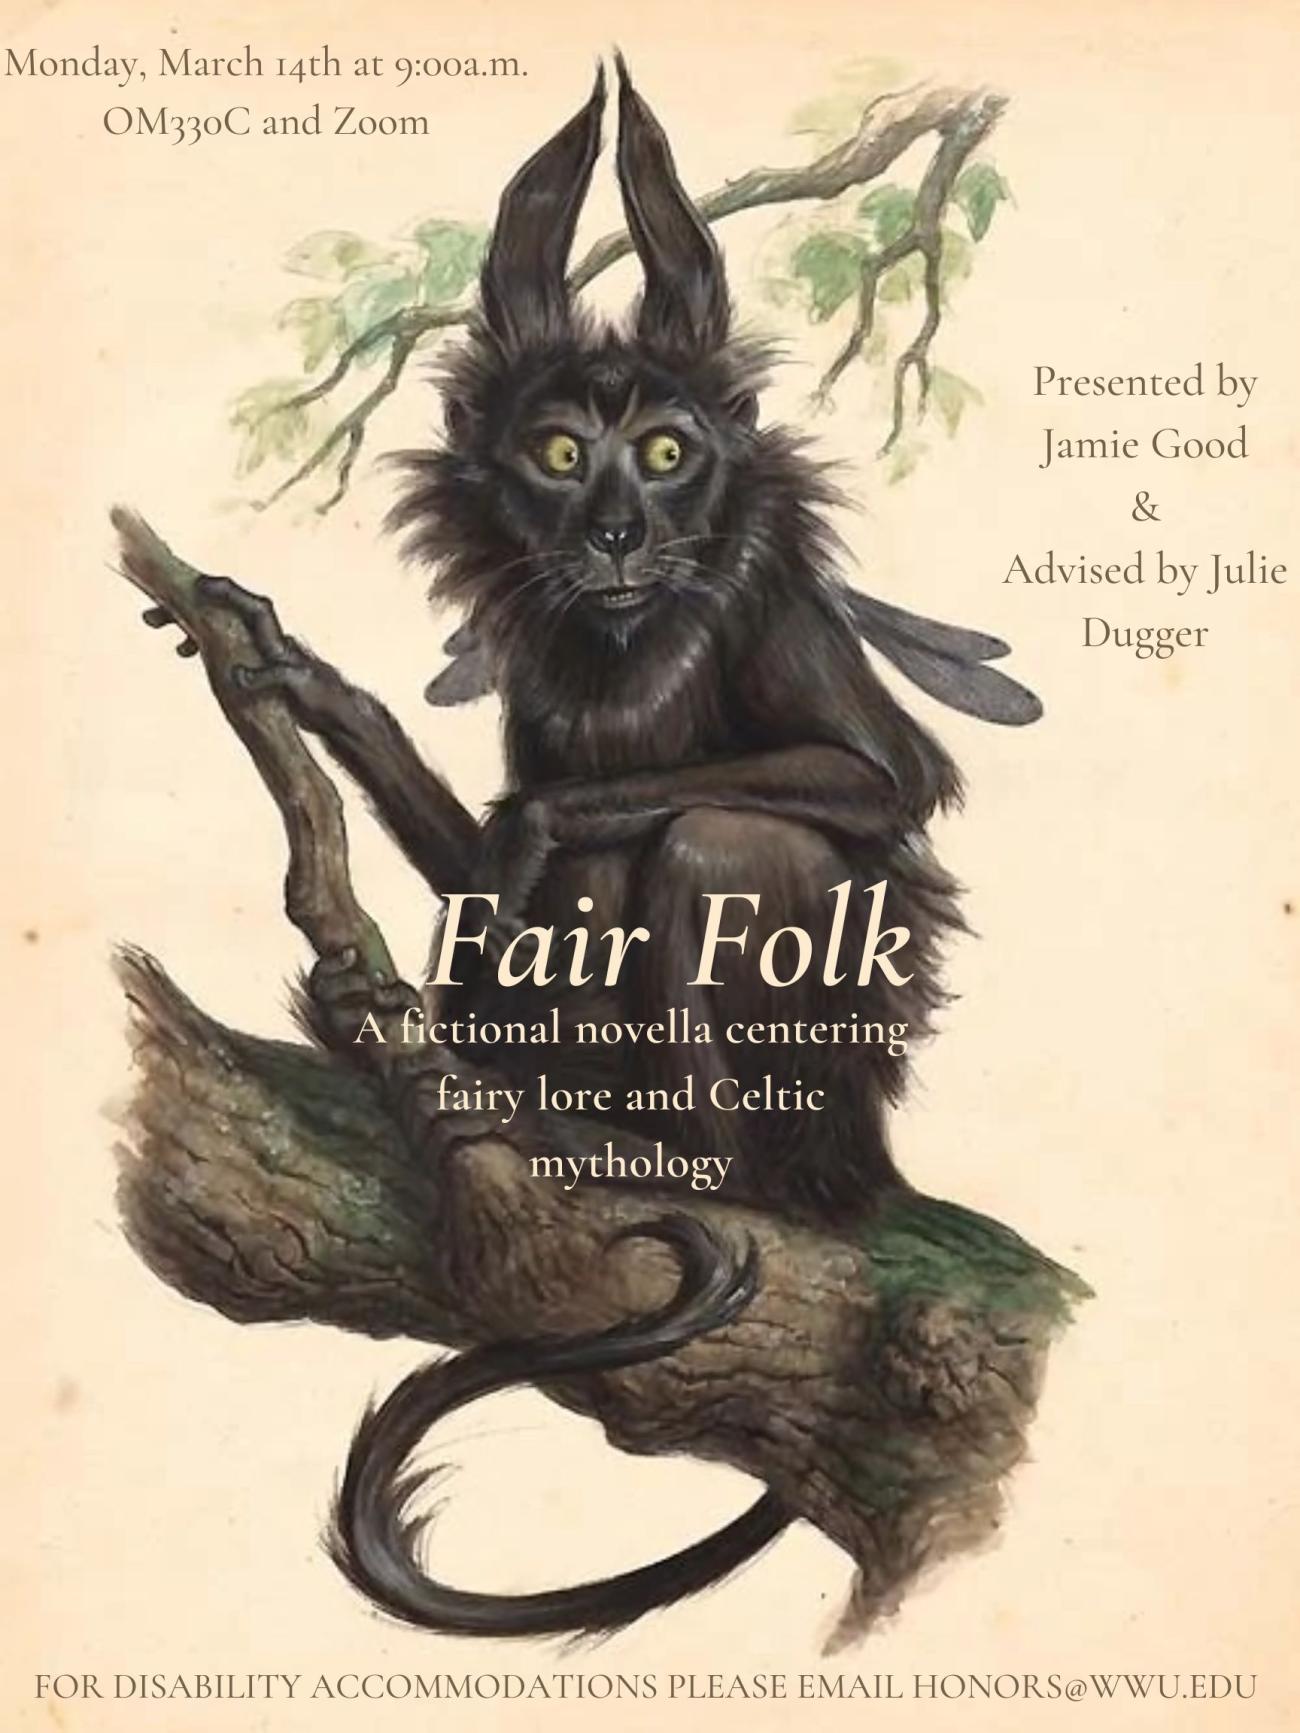 A beige-colored poster featuring a pooka, a Celtic fairy that looks like a hybrid creature. The pooka has black fur, a small mane like that of a monkey or lion, small wings, long, rabbit-like ears, and large yellow eyes. The body looks like that of a monkey. The text says: "Fair Folk, a fictional novella centering fairy lore and Celtic mythology. Monday, March 9th at 9:00a.m. OM 330C. Presented by Jamie Good and advised by Julie Dugger. For disability accommodations please email honors@wwu.edu."